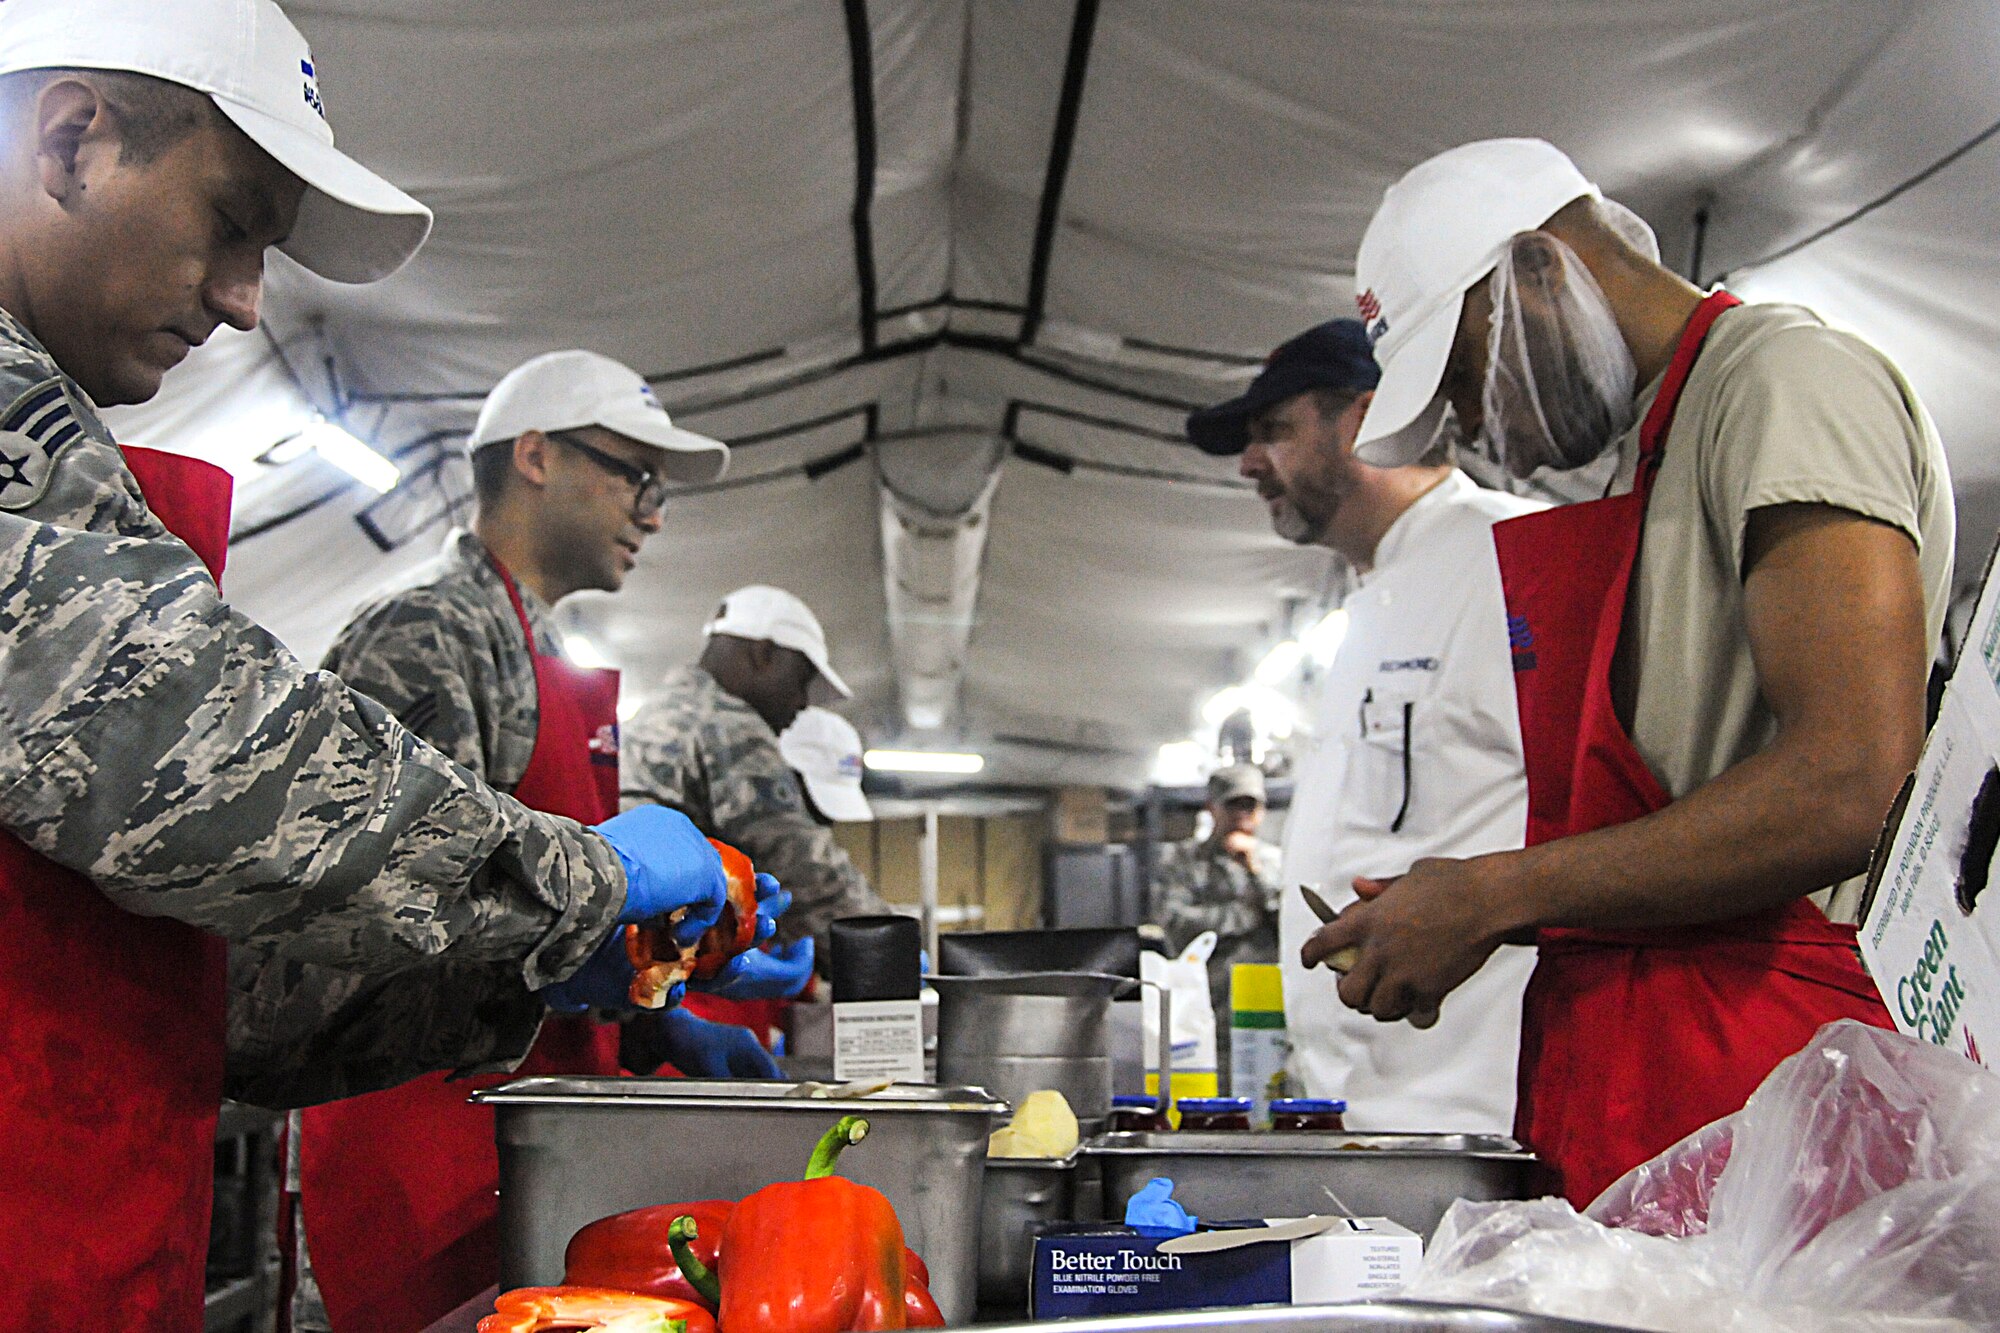 A judge watches meal preparation during this year's Hennessy competition held at the Force Support Silver Flag training facility on Dobbins Air Reserve Base Feb. 9-12. Each year a trophy is awarded to teams representing the best food service programs in the Air Force and is based on the entire scope of an installation's food service program. (U.S. Air Force photo/Senior Airman Justin Clayvon)